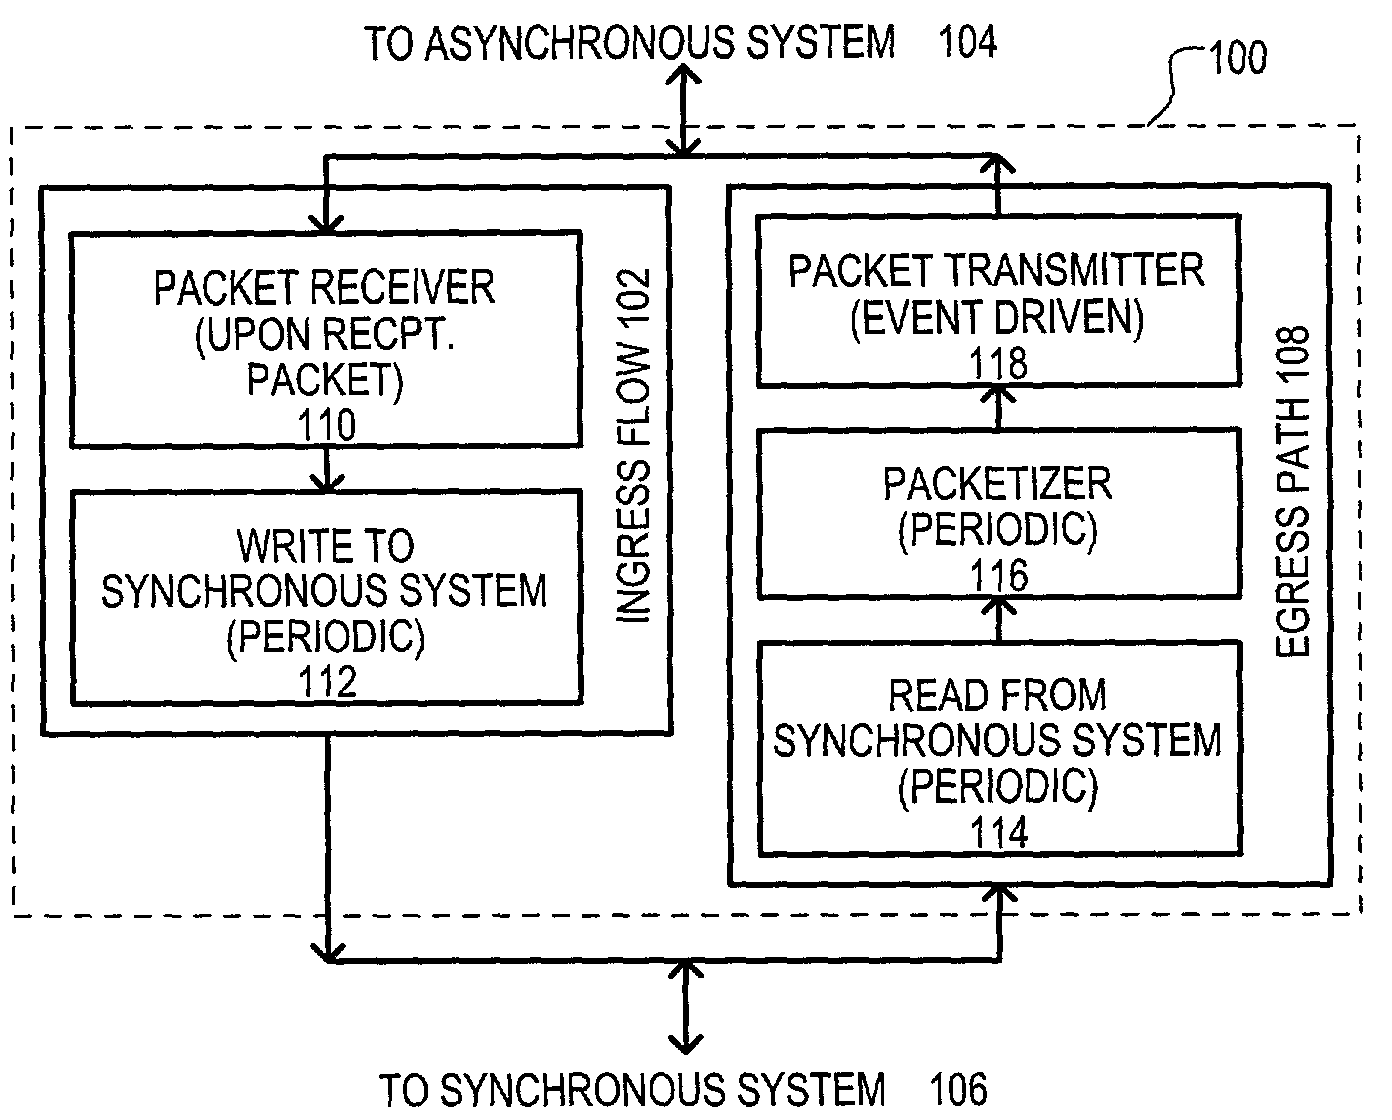 Media flow method for transferring real-time data between asynchronous and synchronous networks